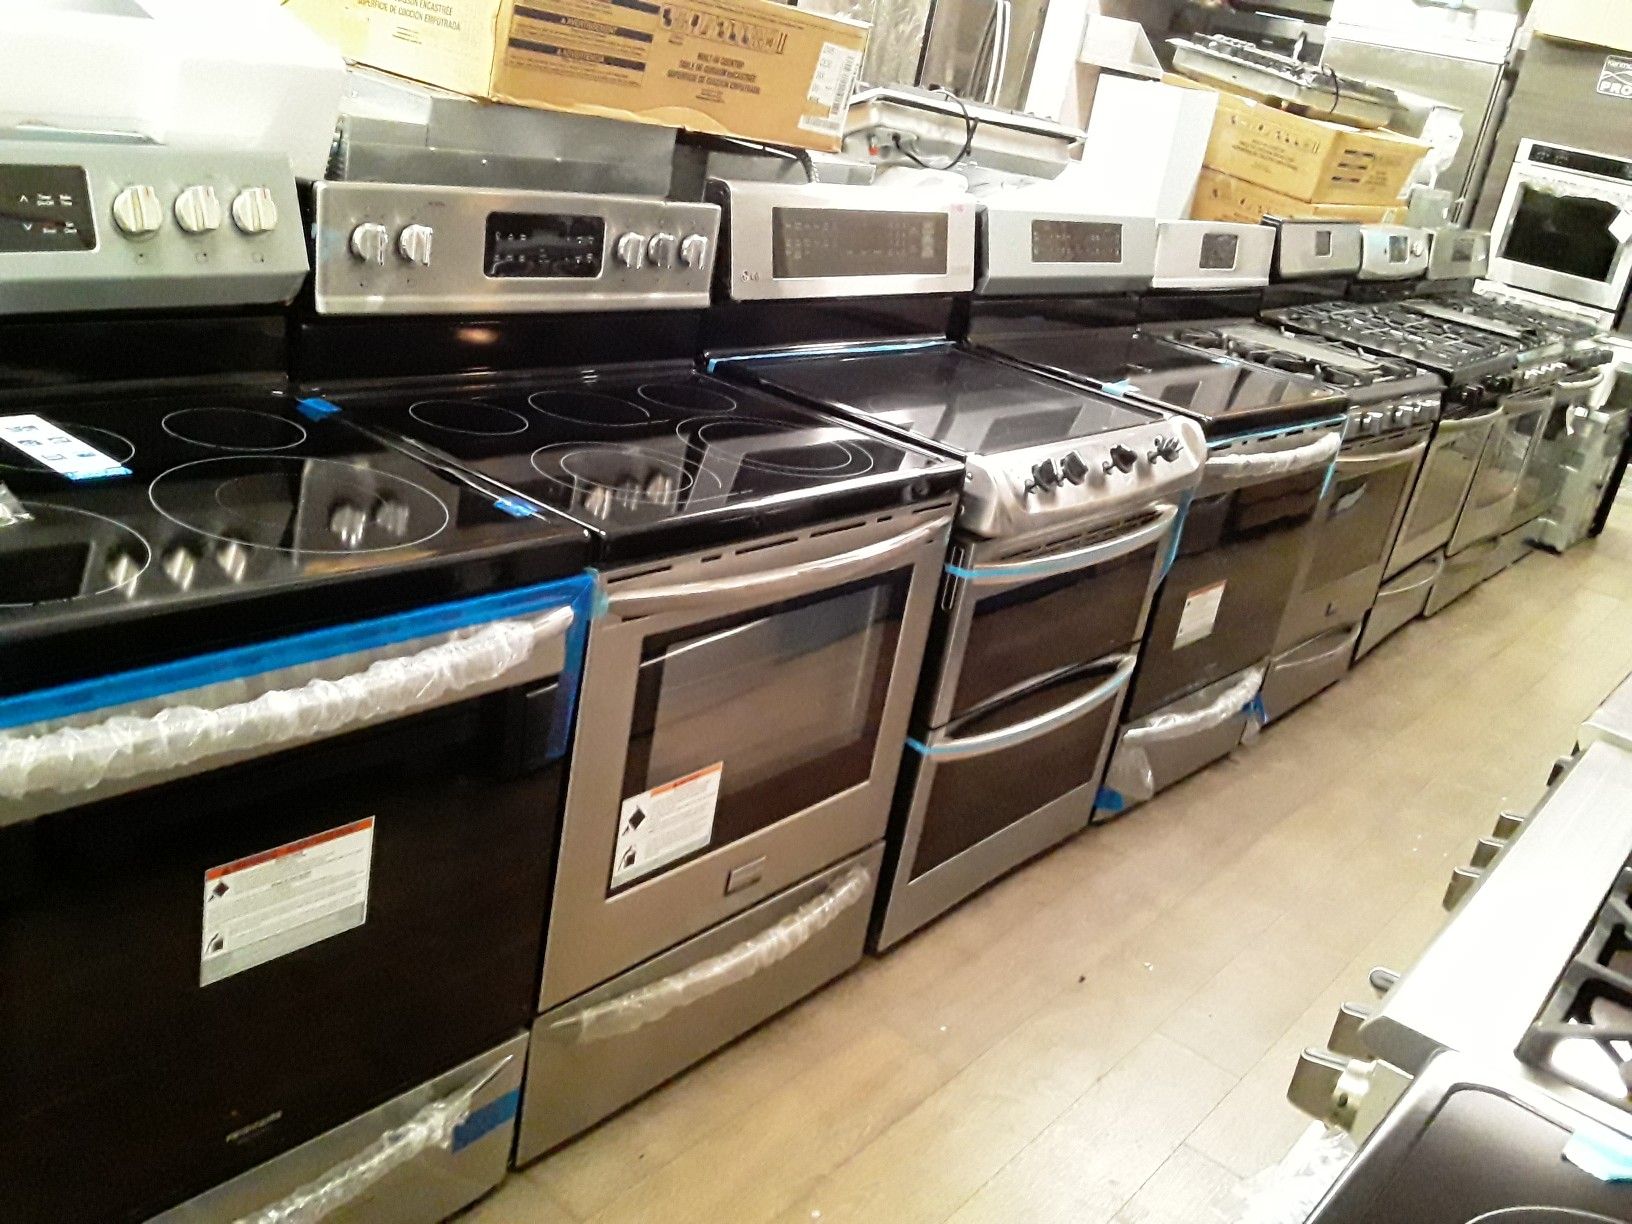 New electric stoves $ 450.00